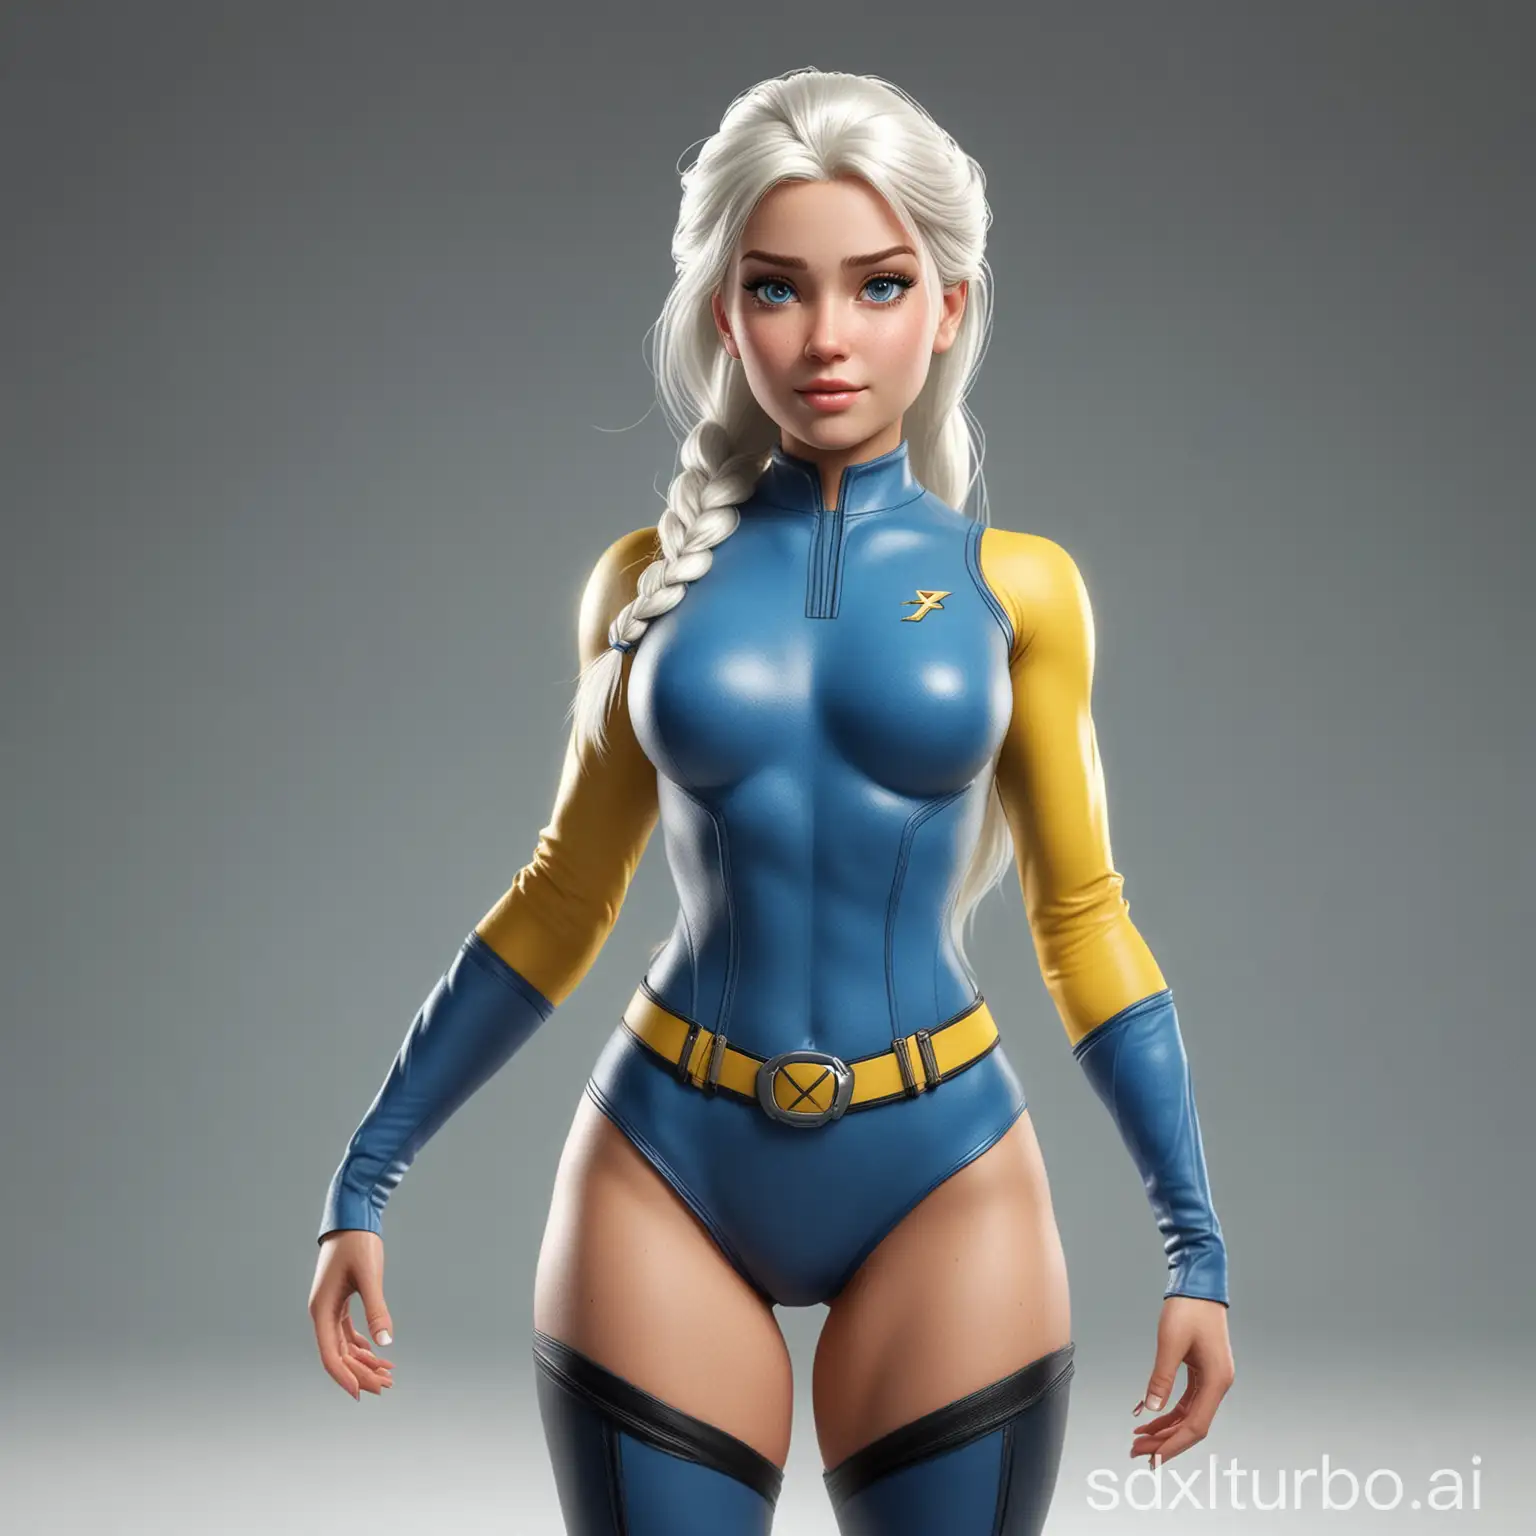 Realistic Elsa with thick fit body, X-Men tight uniform, blue and yellow small shoulders, big ass, freckles on face with, sexy lips and white hair big tits tall sexy woman long muscular legs. Frontal pose young baby face with crystal blue eyes. Pear shaped body. Bottom part of the body significantly wider and top part of the body smaller.(full body head to feed)